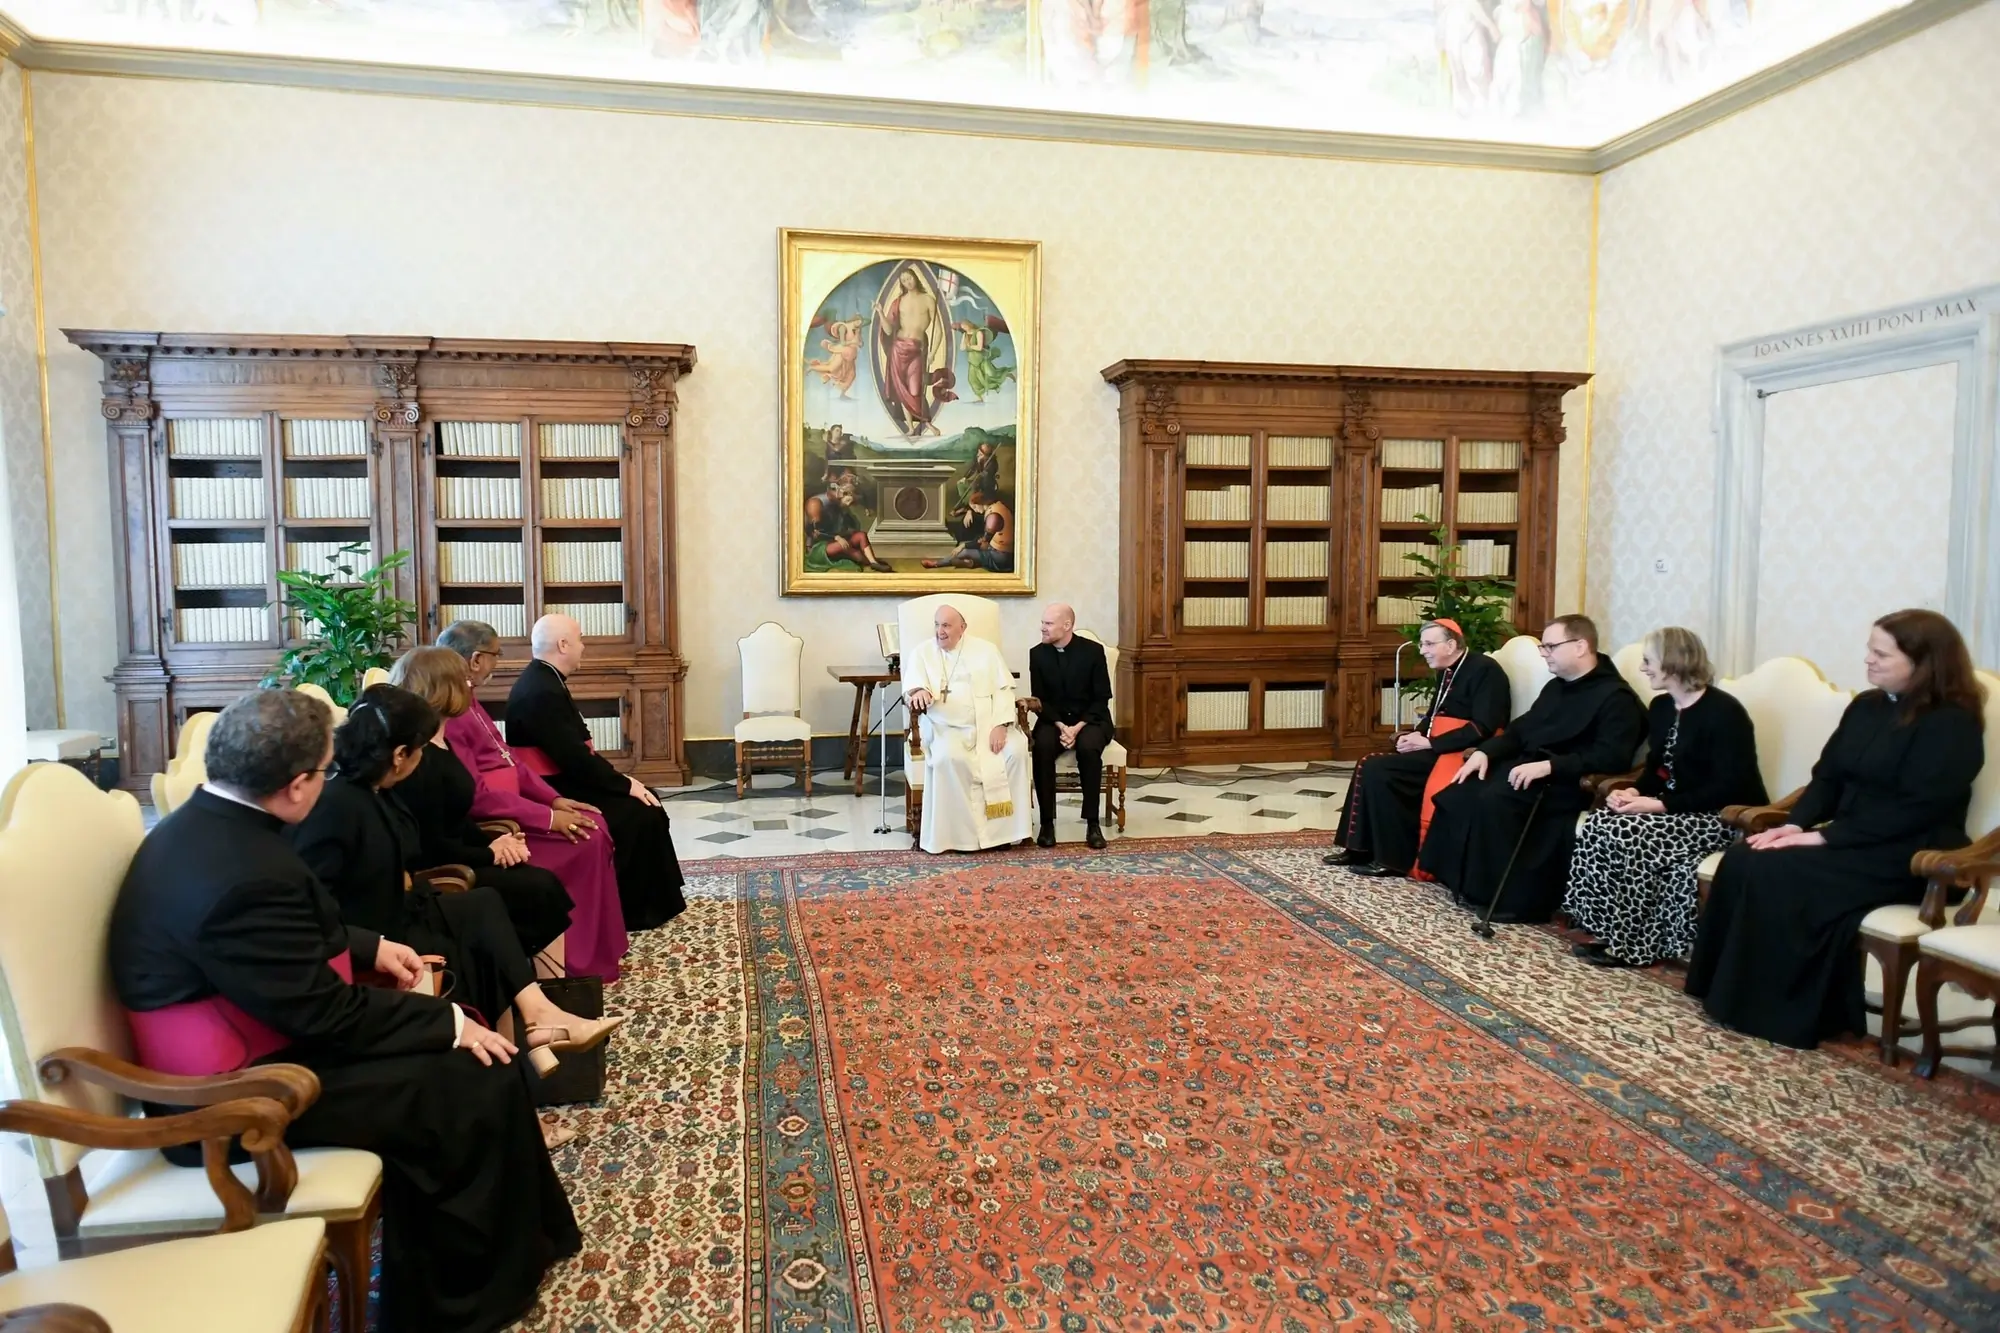 Archbishop Stephen Cottrell, the Archbishop of York, met with Pope Francis at the Apostolic Palace in Rome